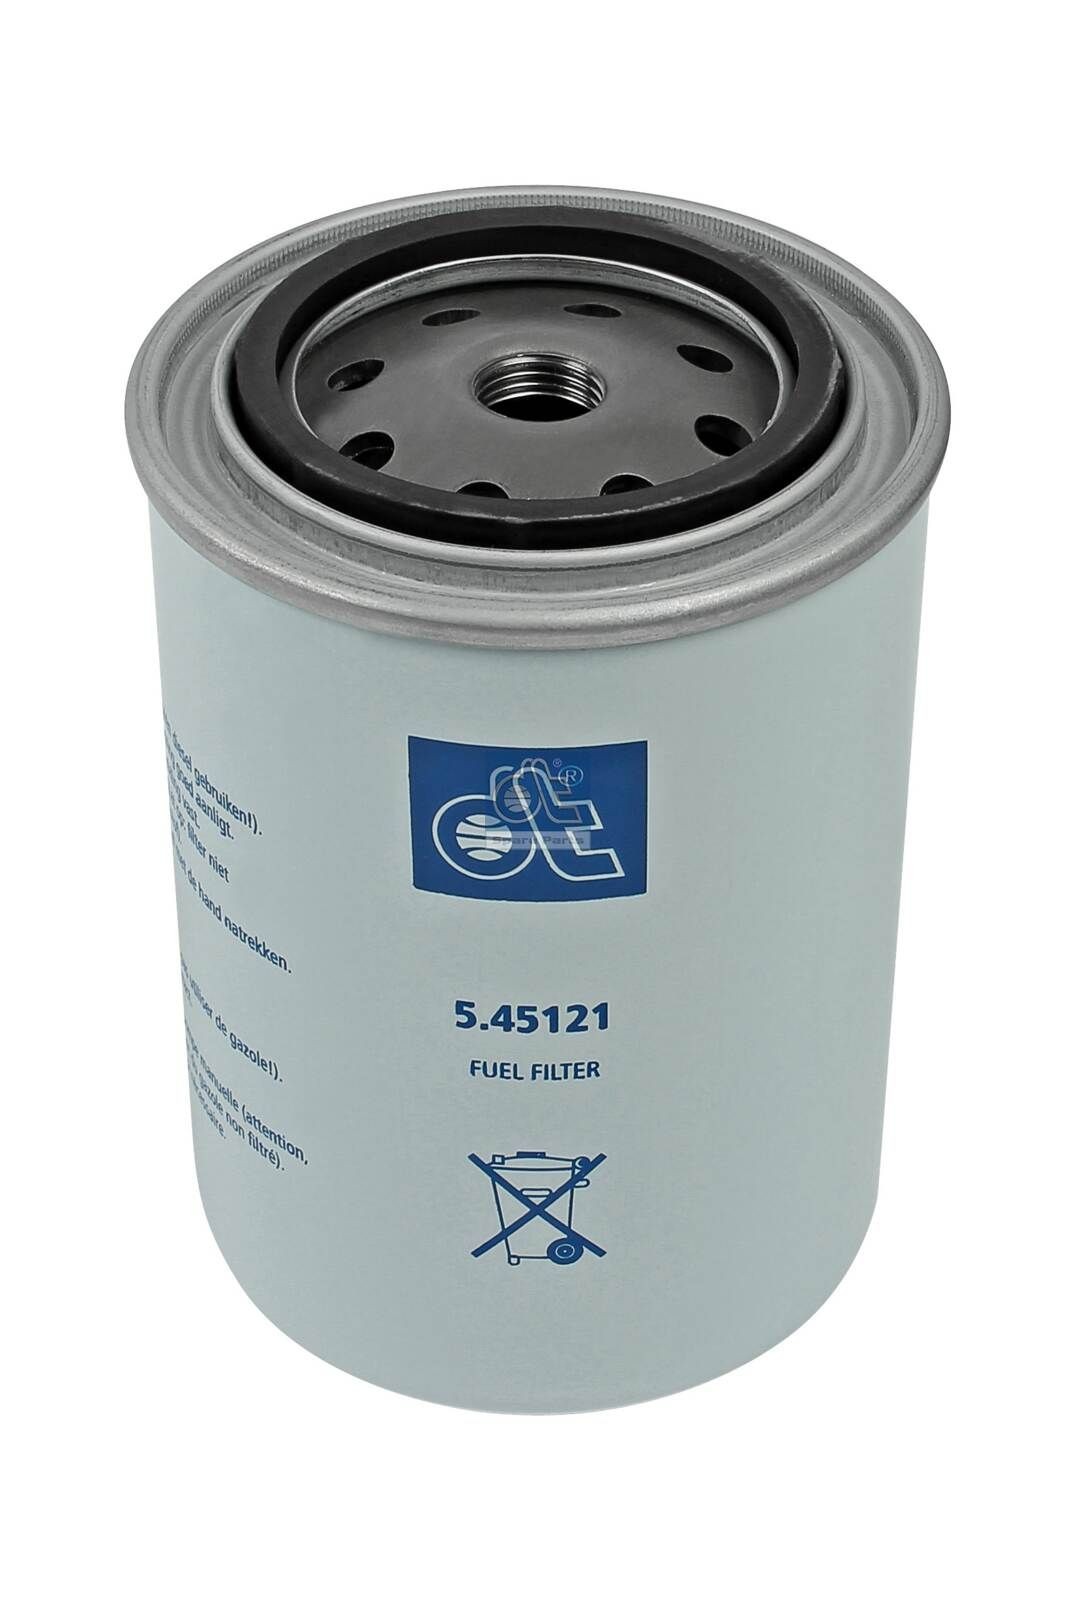 WDK 940/5 DT Spare Parts 5.45121 Fuel filter 0247 139